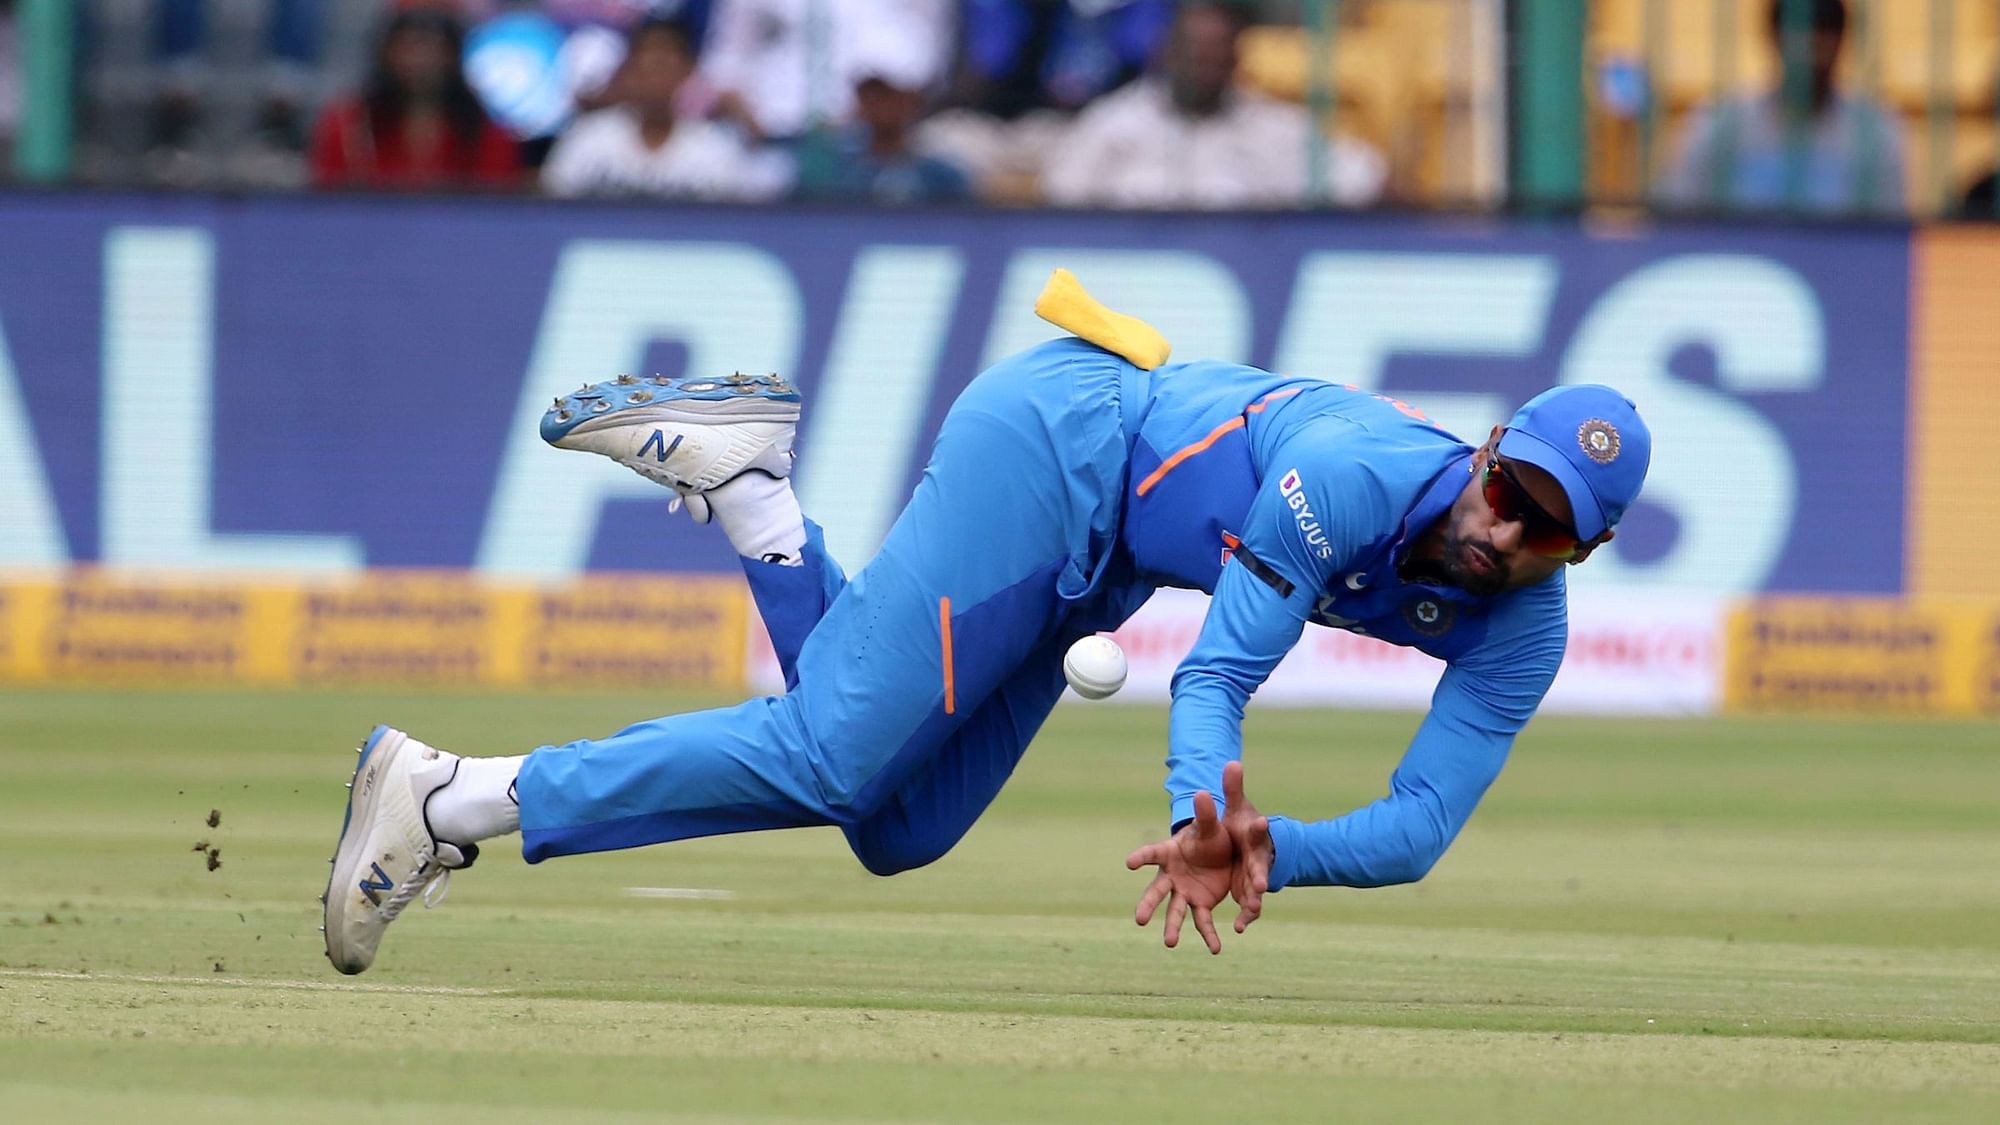 Shikhar Dhawan injured his shoulder after diving to save an Aaron Finch shot in the cover region.